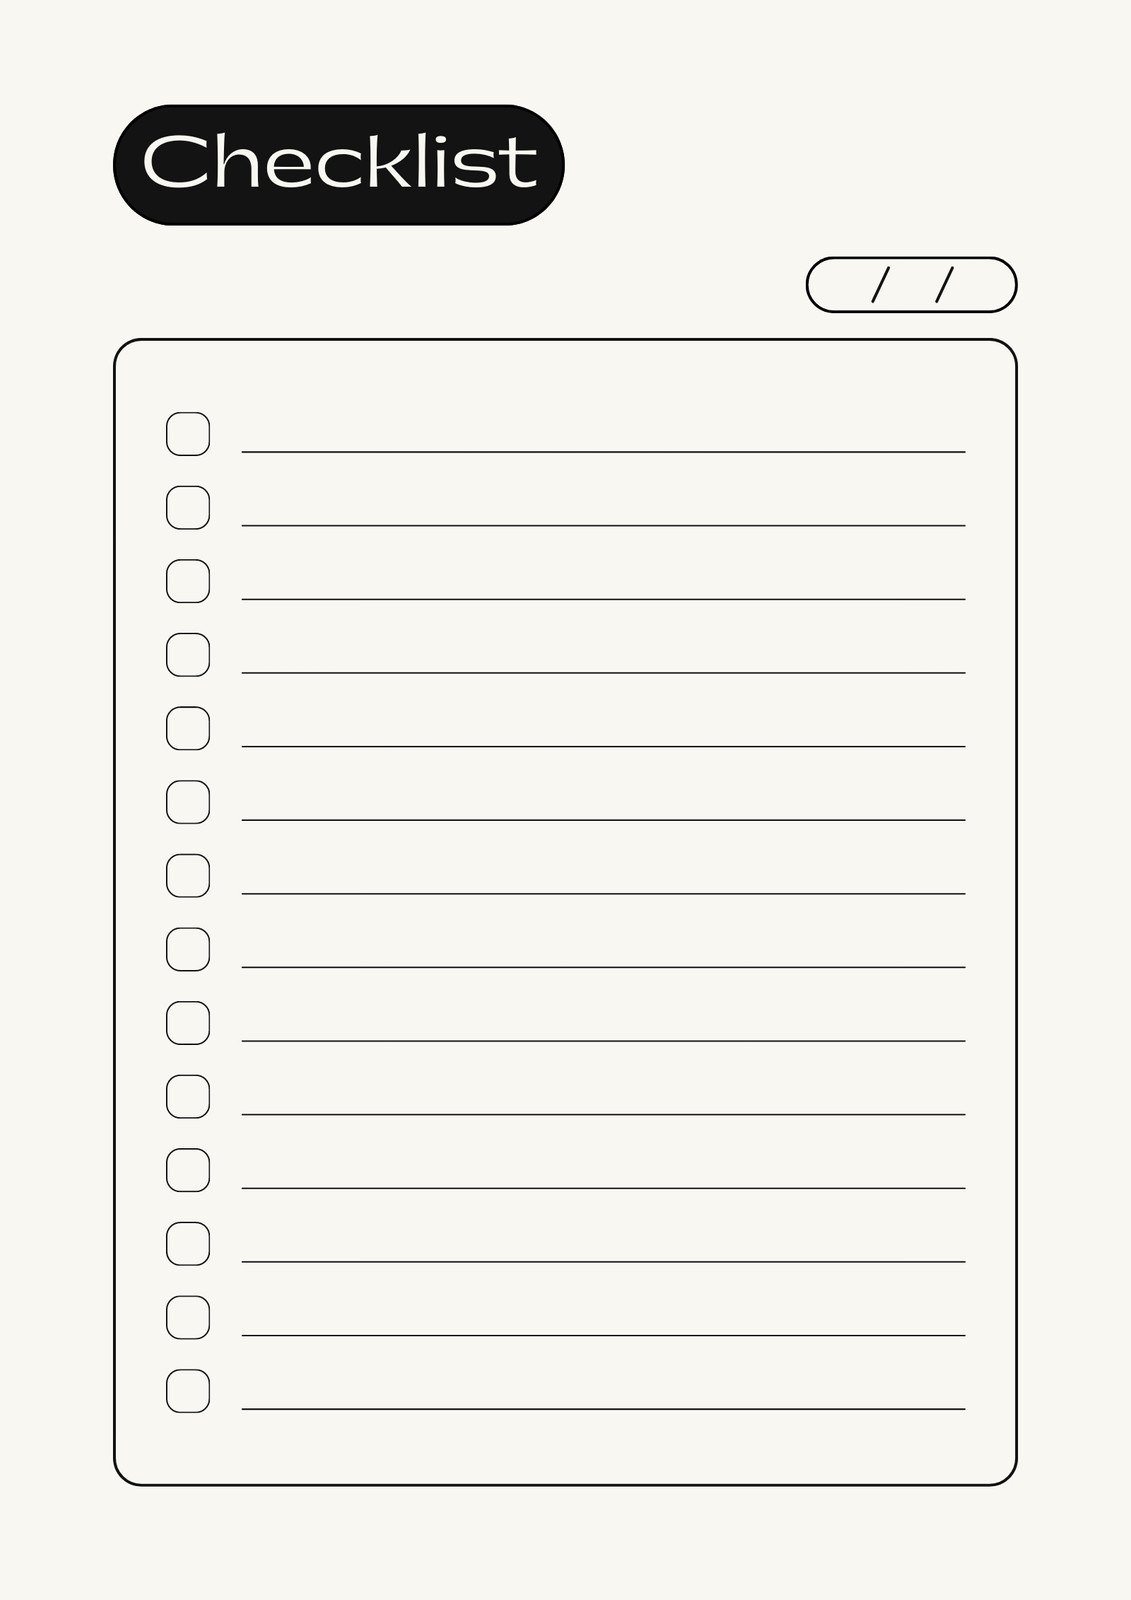 Free, custom downloadable checklist templates  Canva Within Blank Checklist Template Pdf